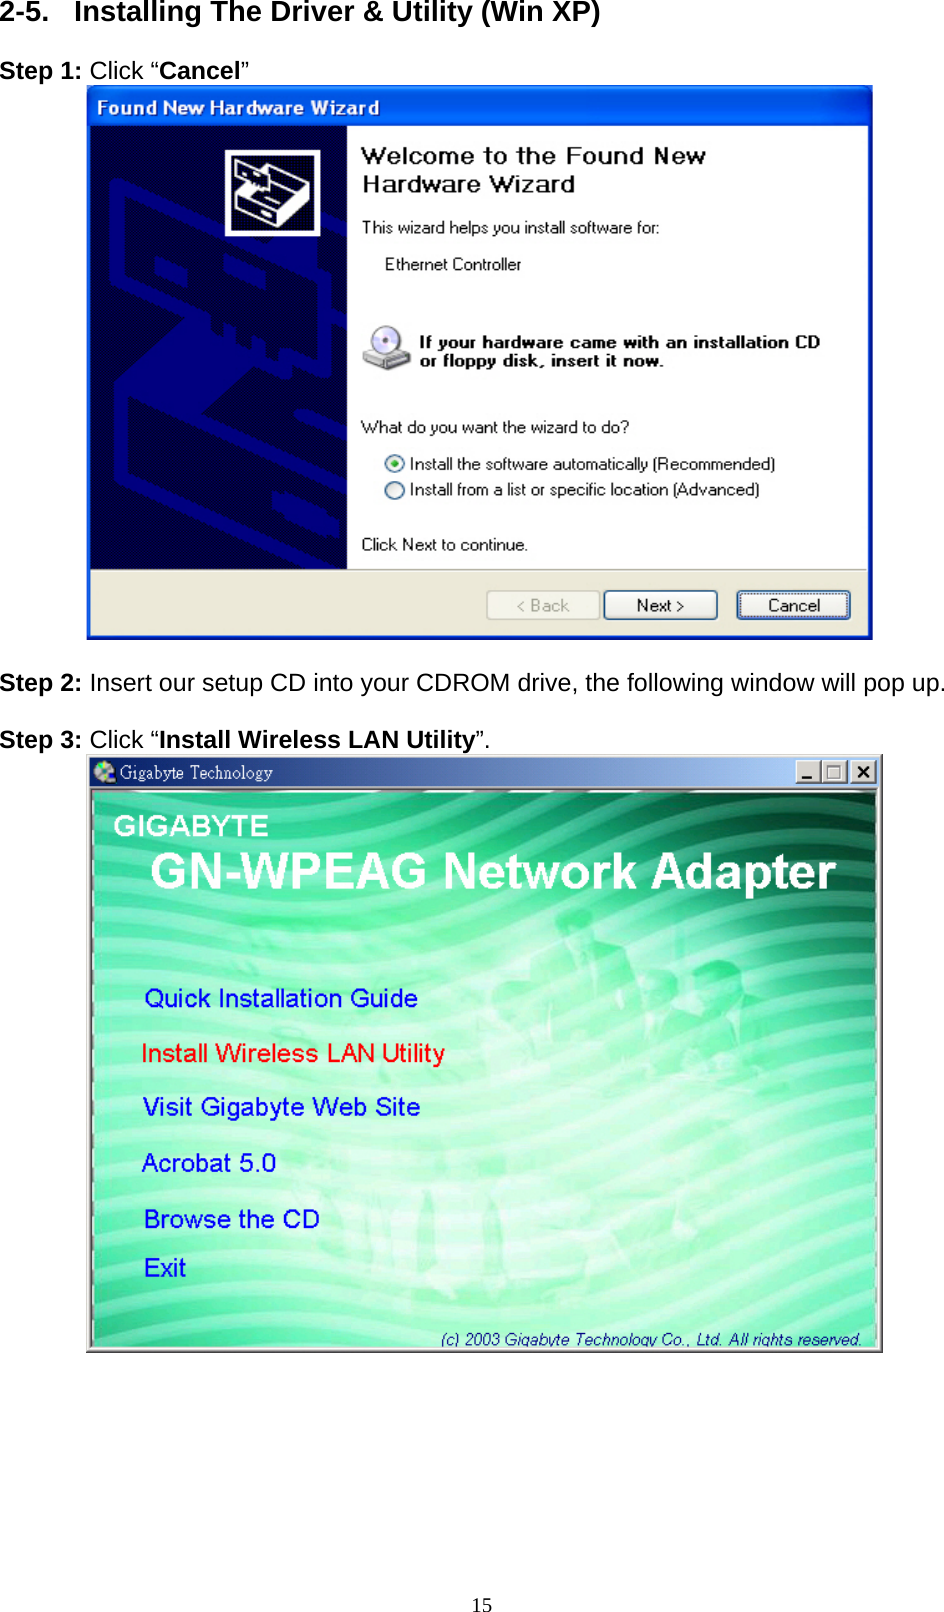 15  2-5.  Installing The Driver &amp; Utility (Win XP)  Step 1: Click “Cancel”   Step 2: Insert our setup CD into your CDROM drive, the following window will pop up.  Step 3: Click “Install Wireless LAN Utility”.           